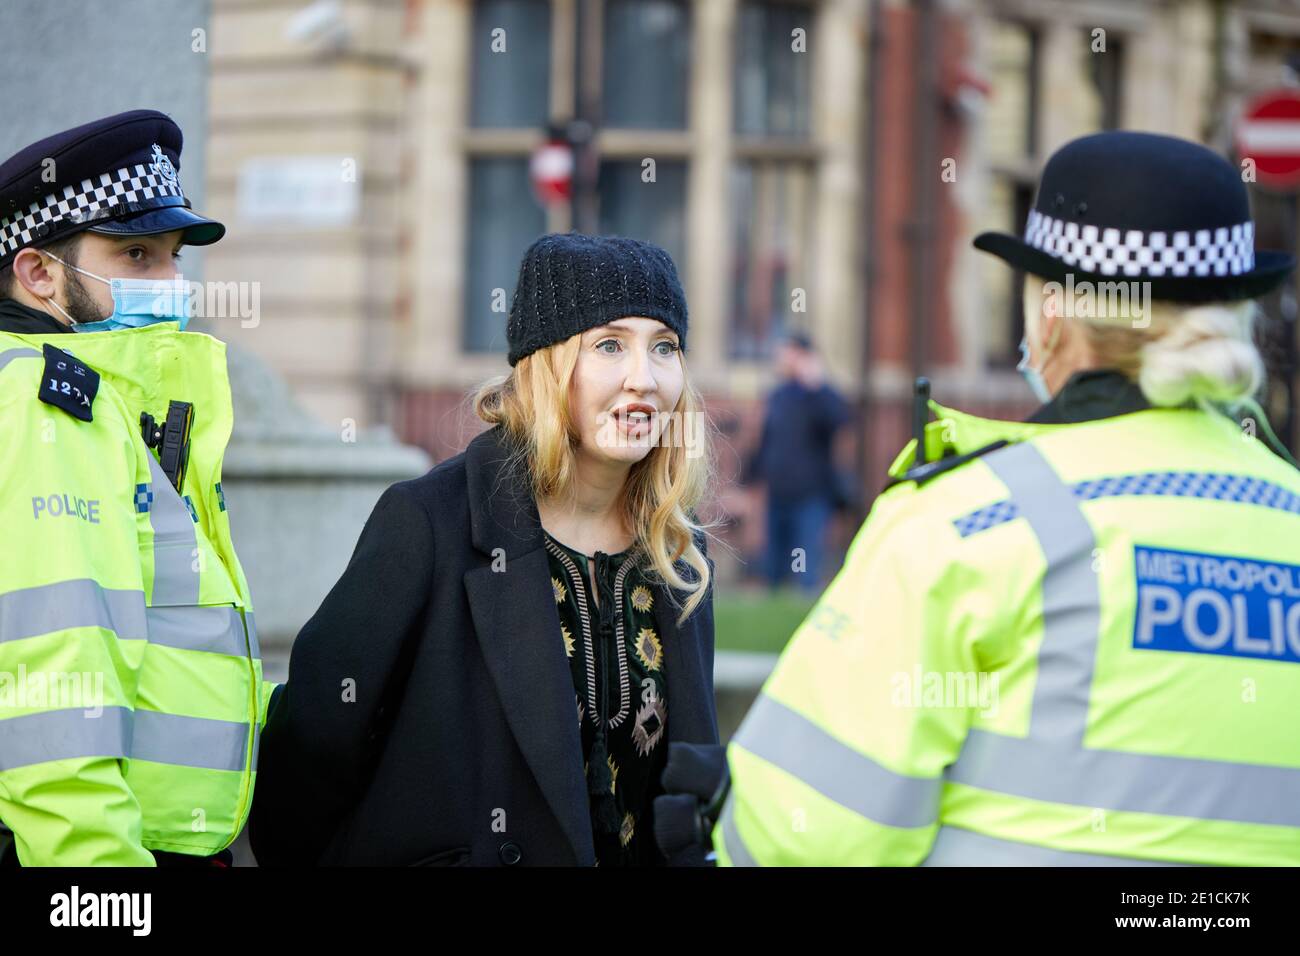 London, UK. - 6 Jan 2021: Anti-lockdown activist Debbie Hicks is arrested while attending a protest in Parliament Square against further government coronavirus pandemic  measures. Stock Photo